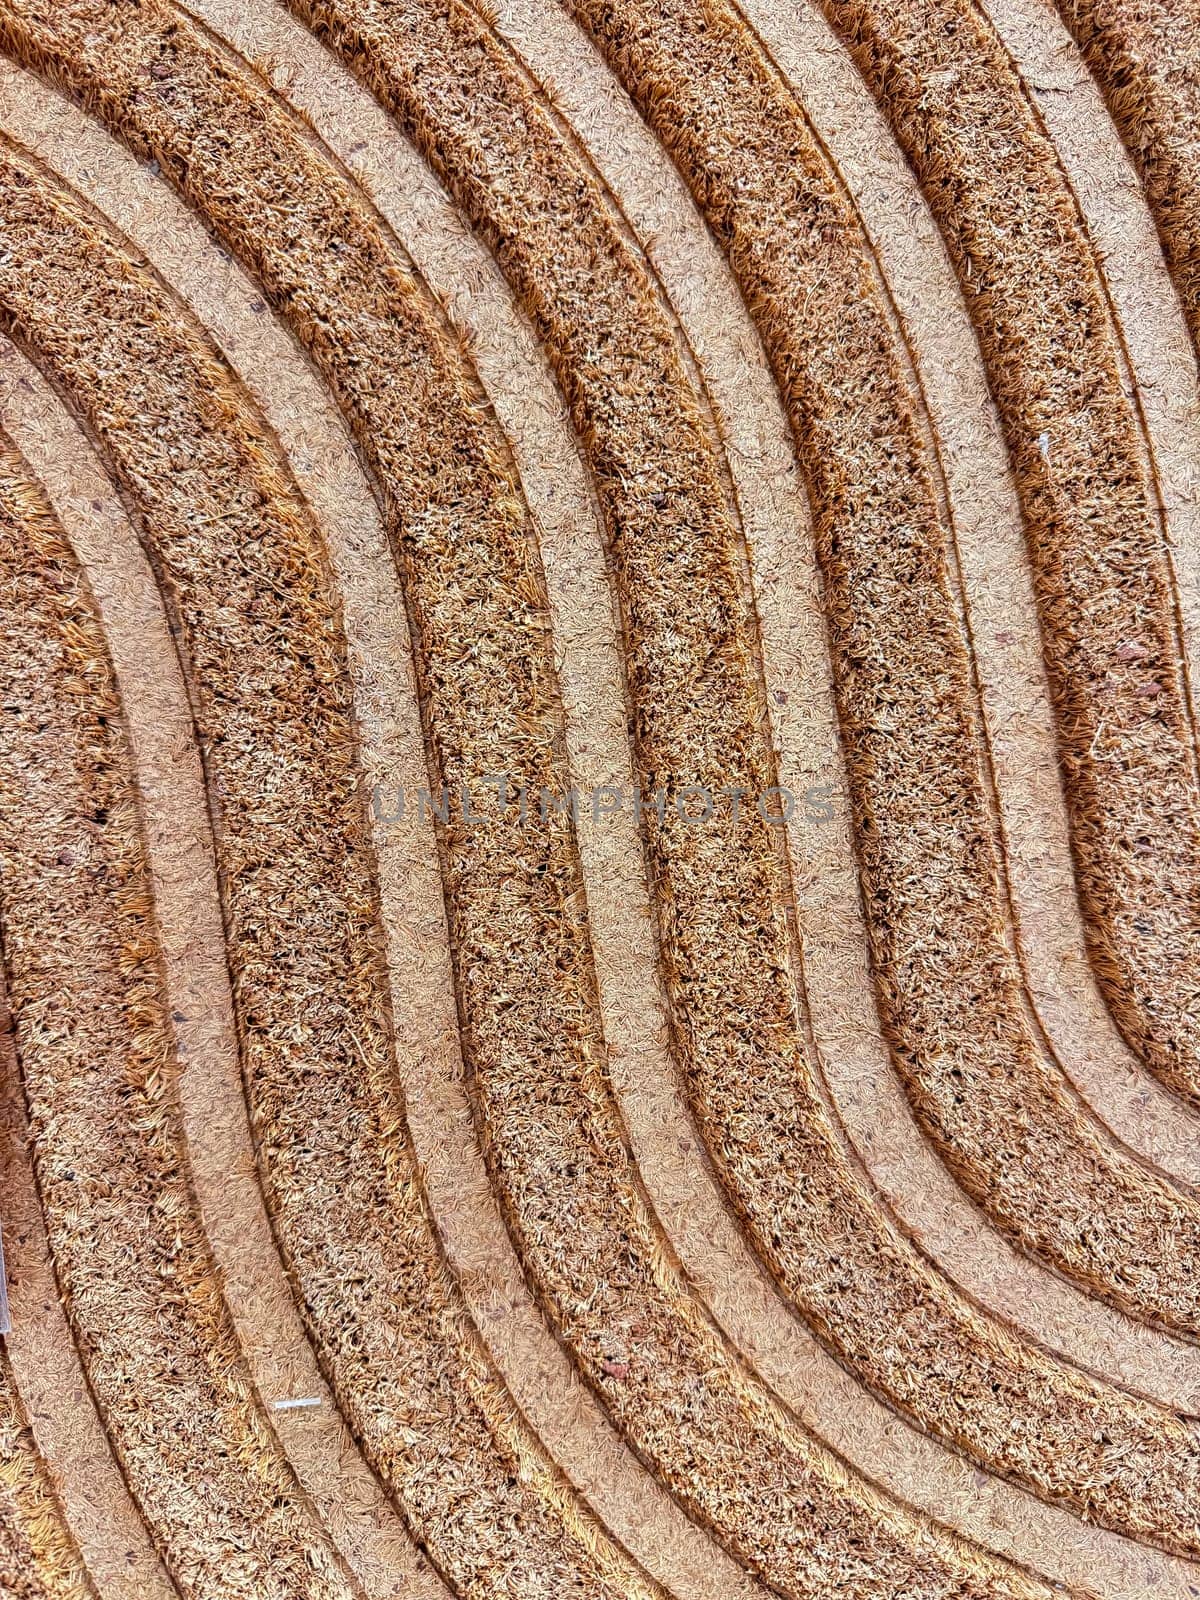 Texture close up of concentric circles on compressed coconut coir for natural fiber background. Natural background for design, websites or cards. by Lunnica